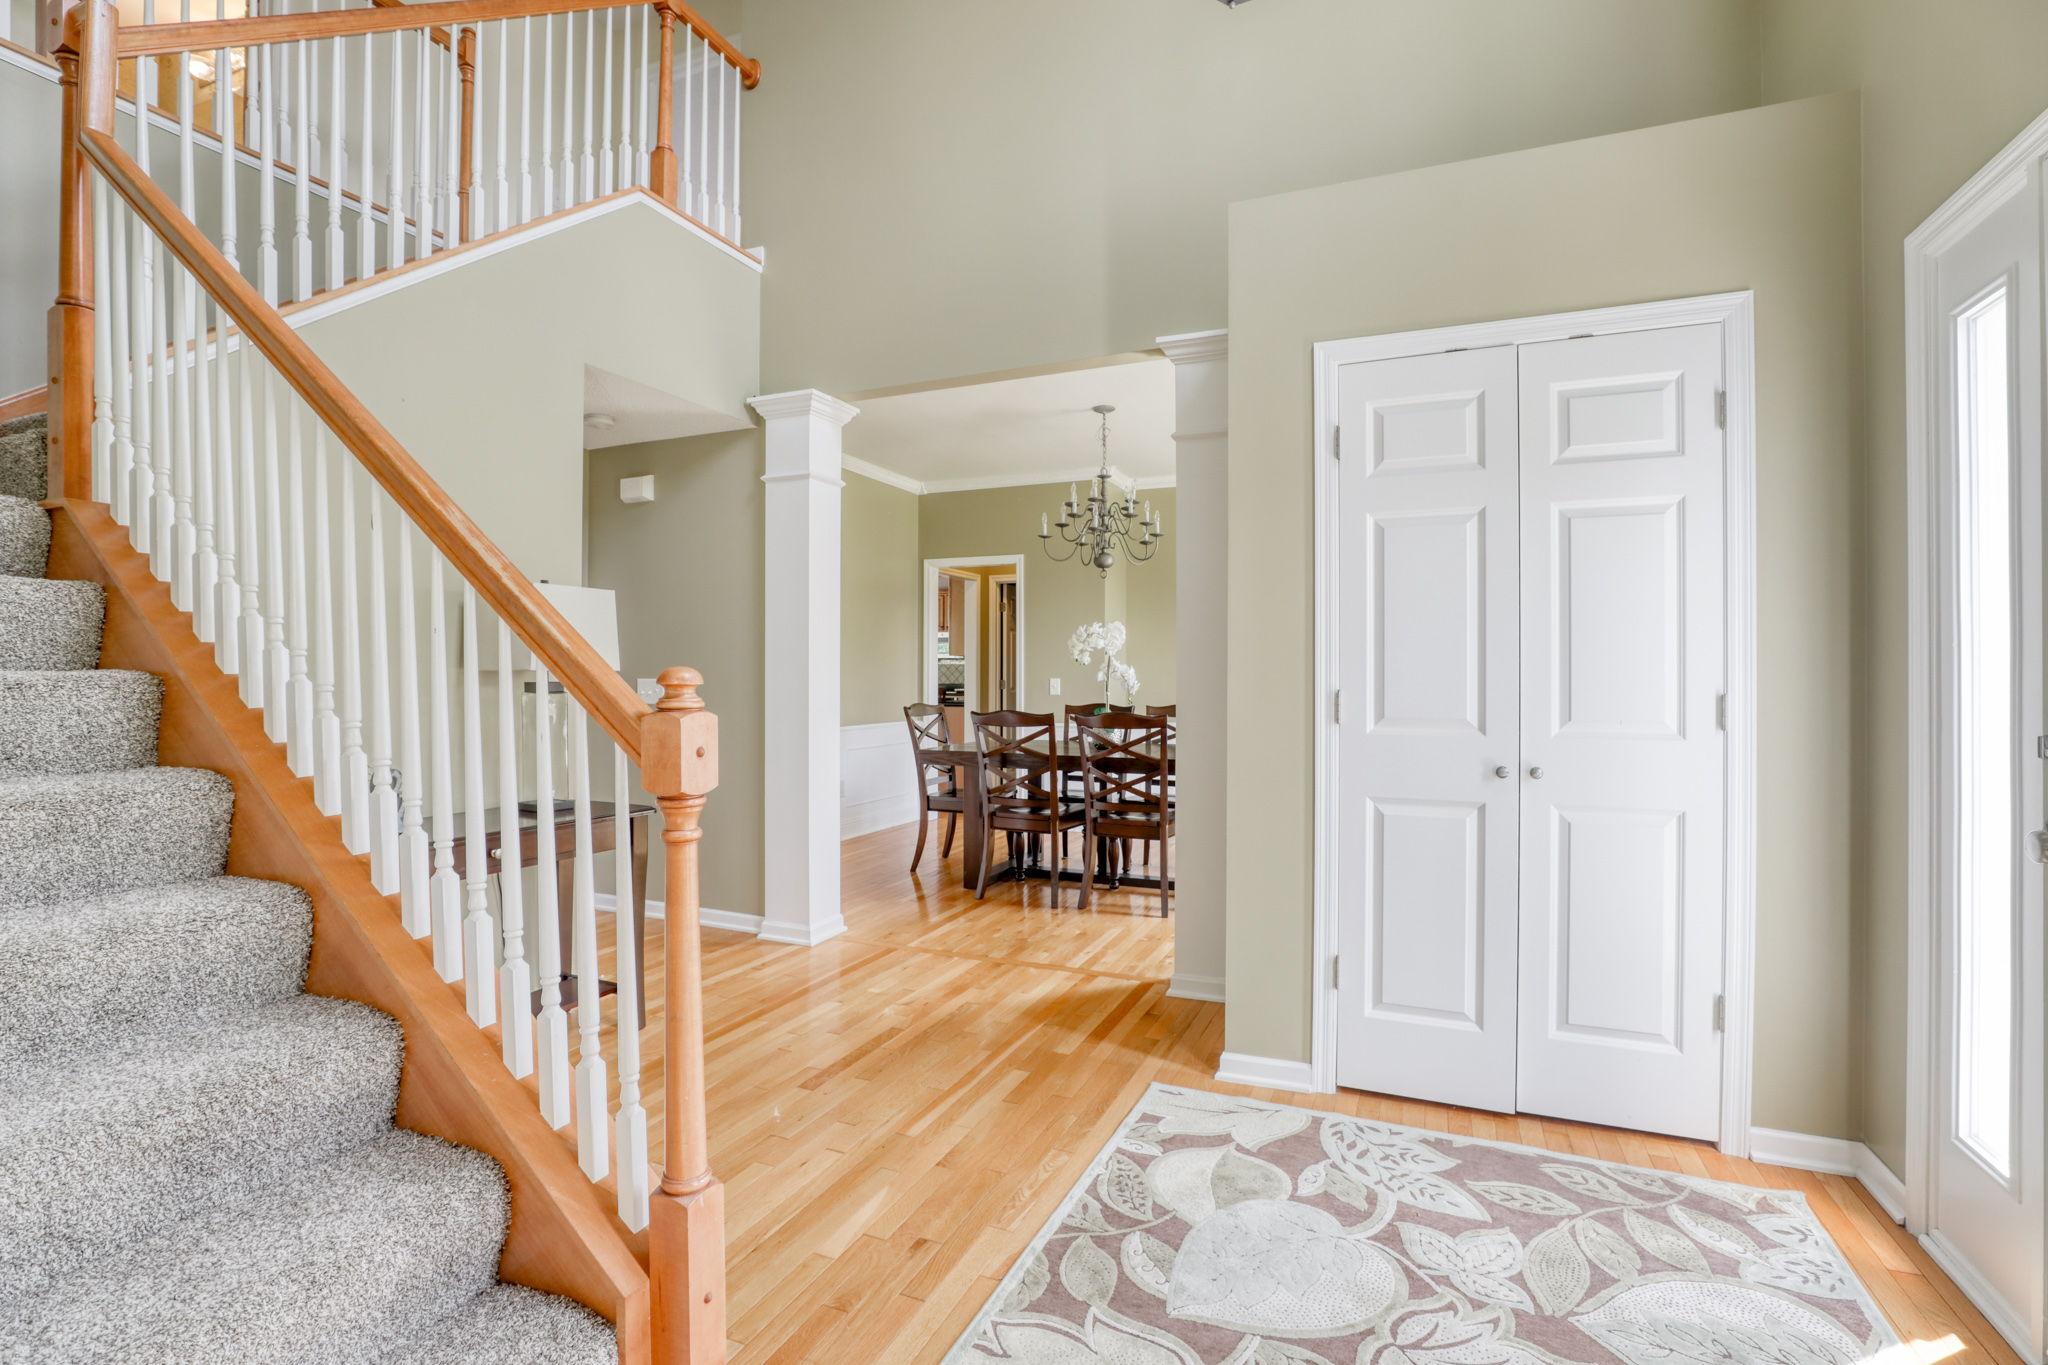 Welcoming 2 story foyer with grand staircase